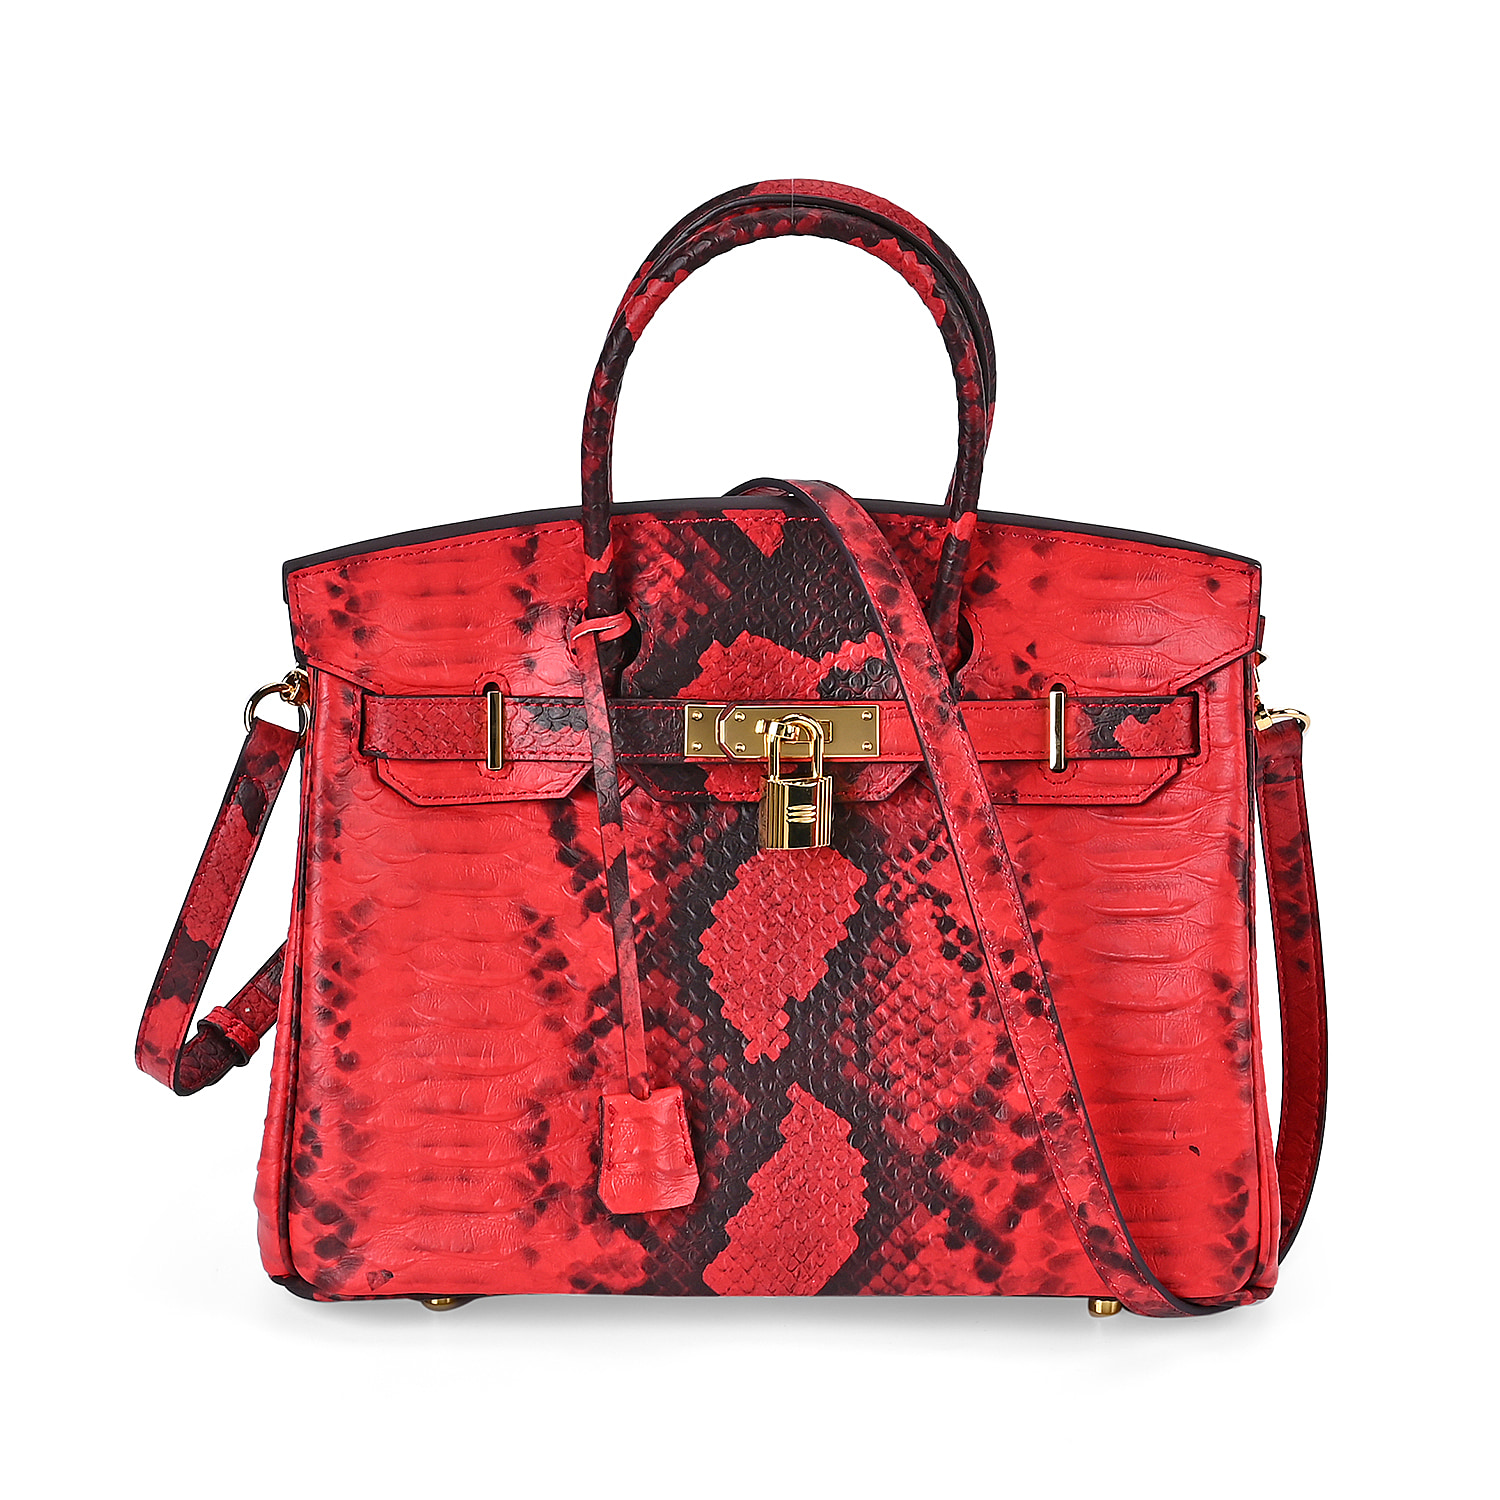 Leather-Snakeskin-Crossbody-Bag-Size-30x16x24-cm-Red-Red